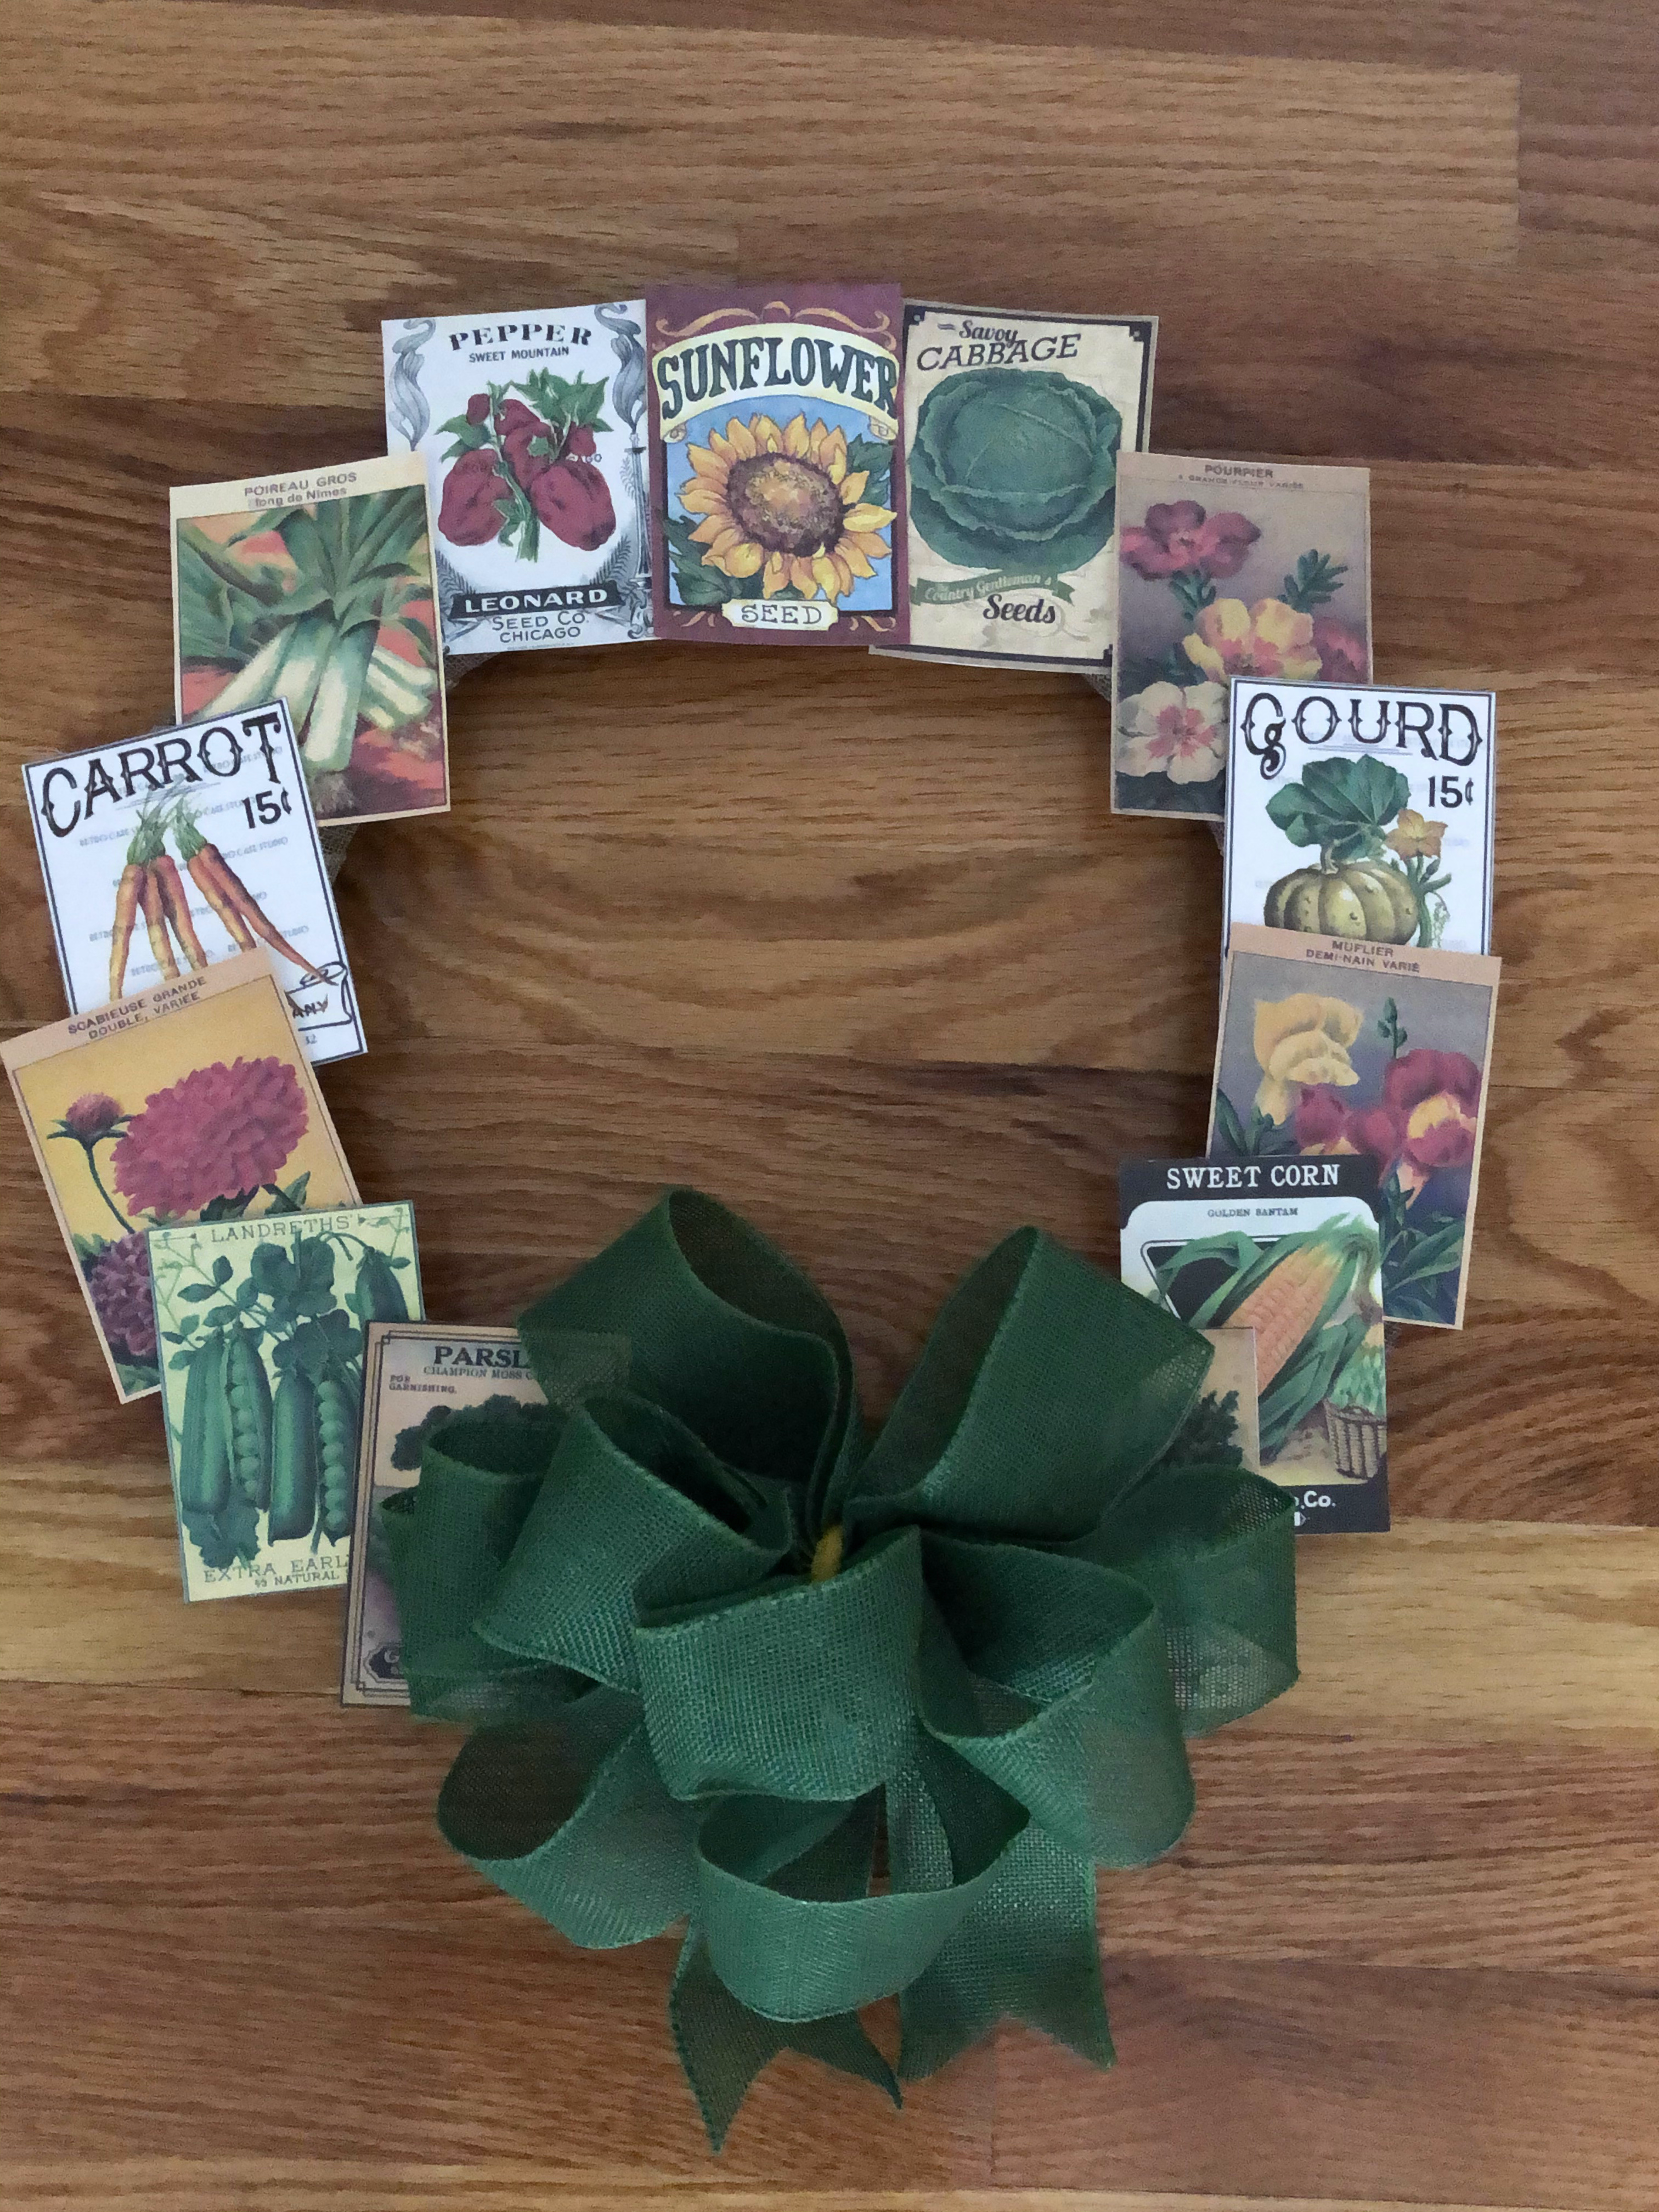 Photo of a wreath made from seed packets.